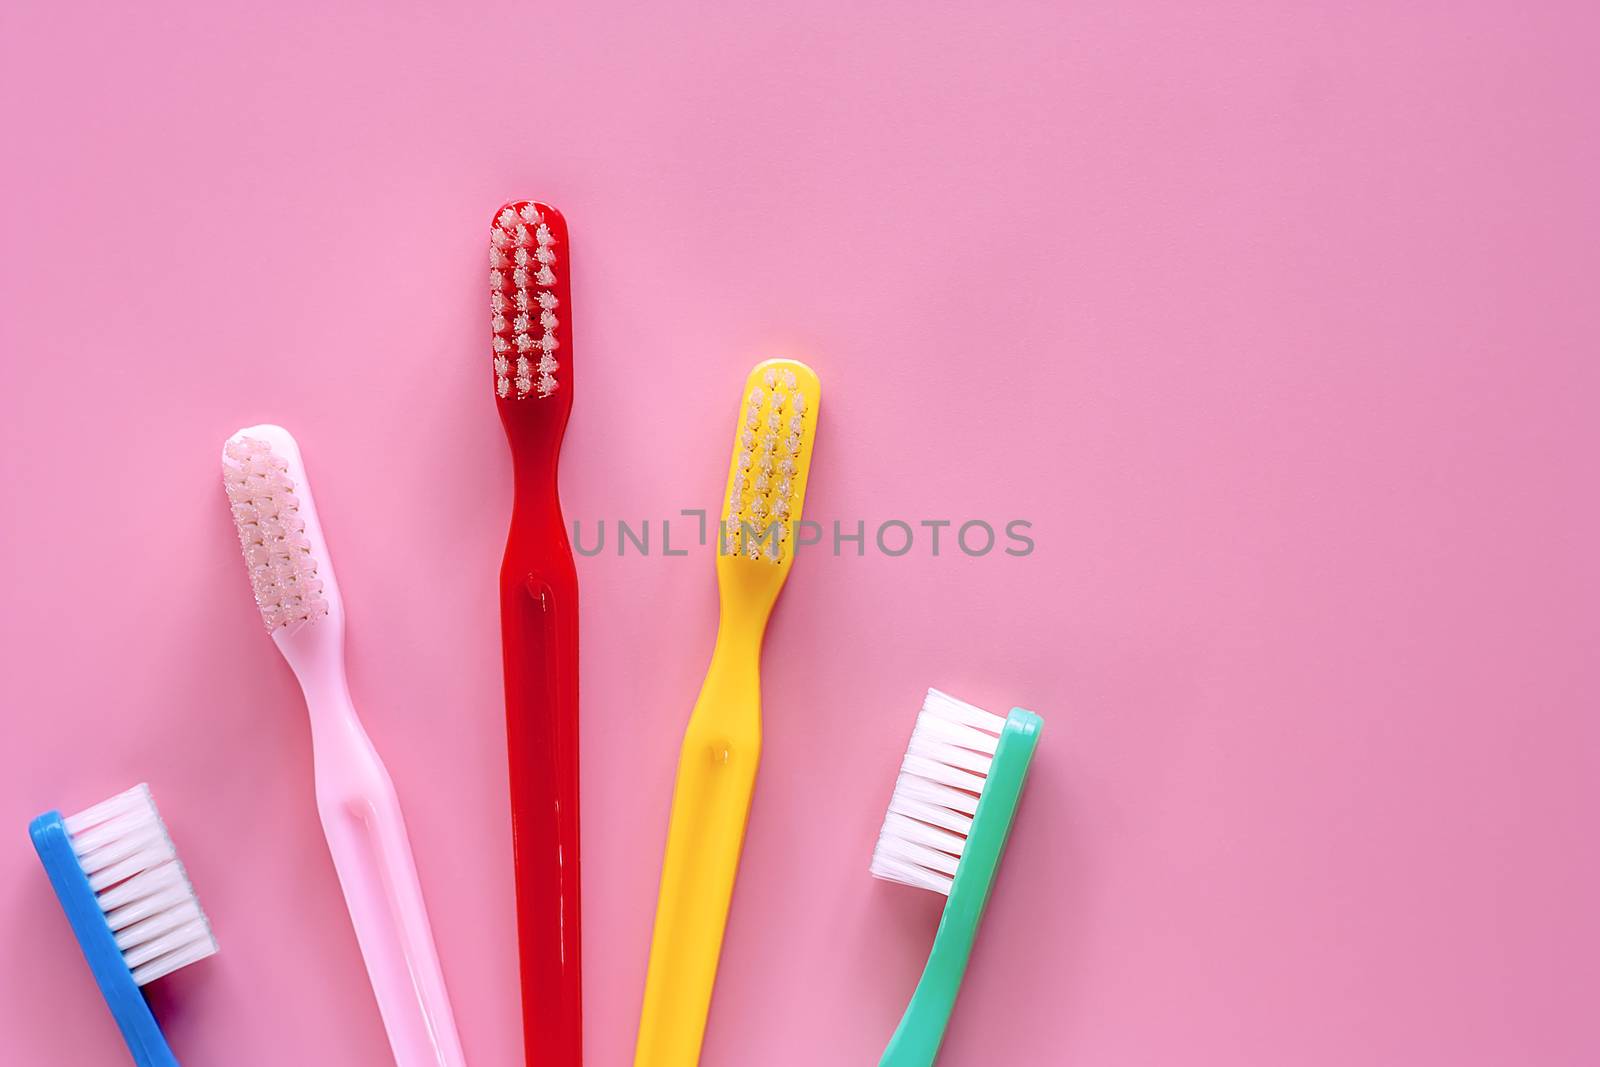 Toothbrush used for cleaning the teeth on pink background by iamnoonmai